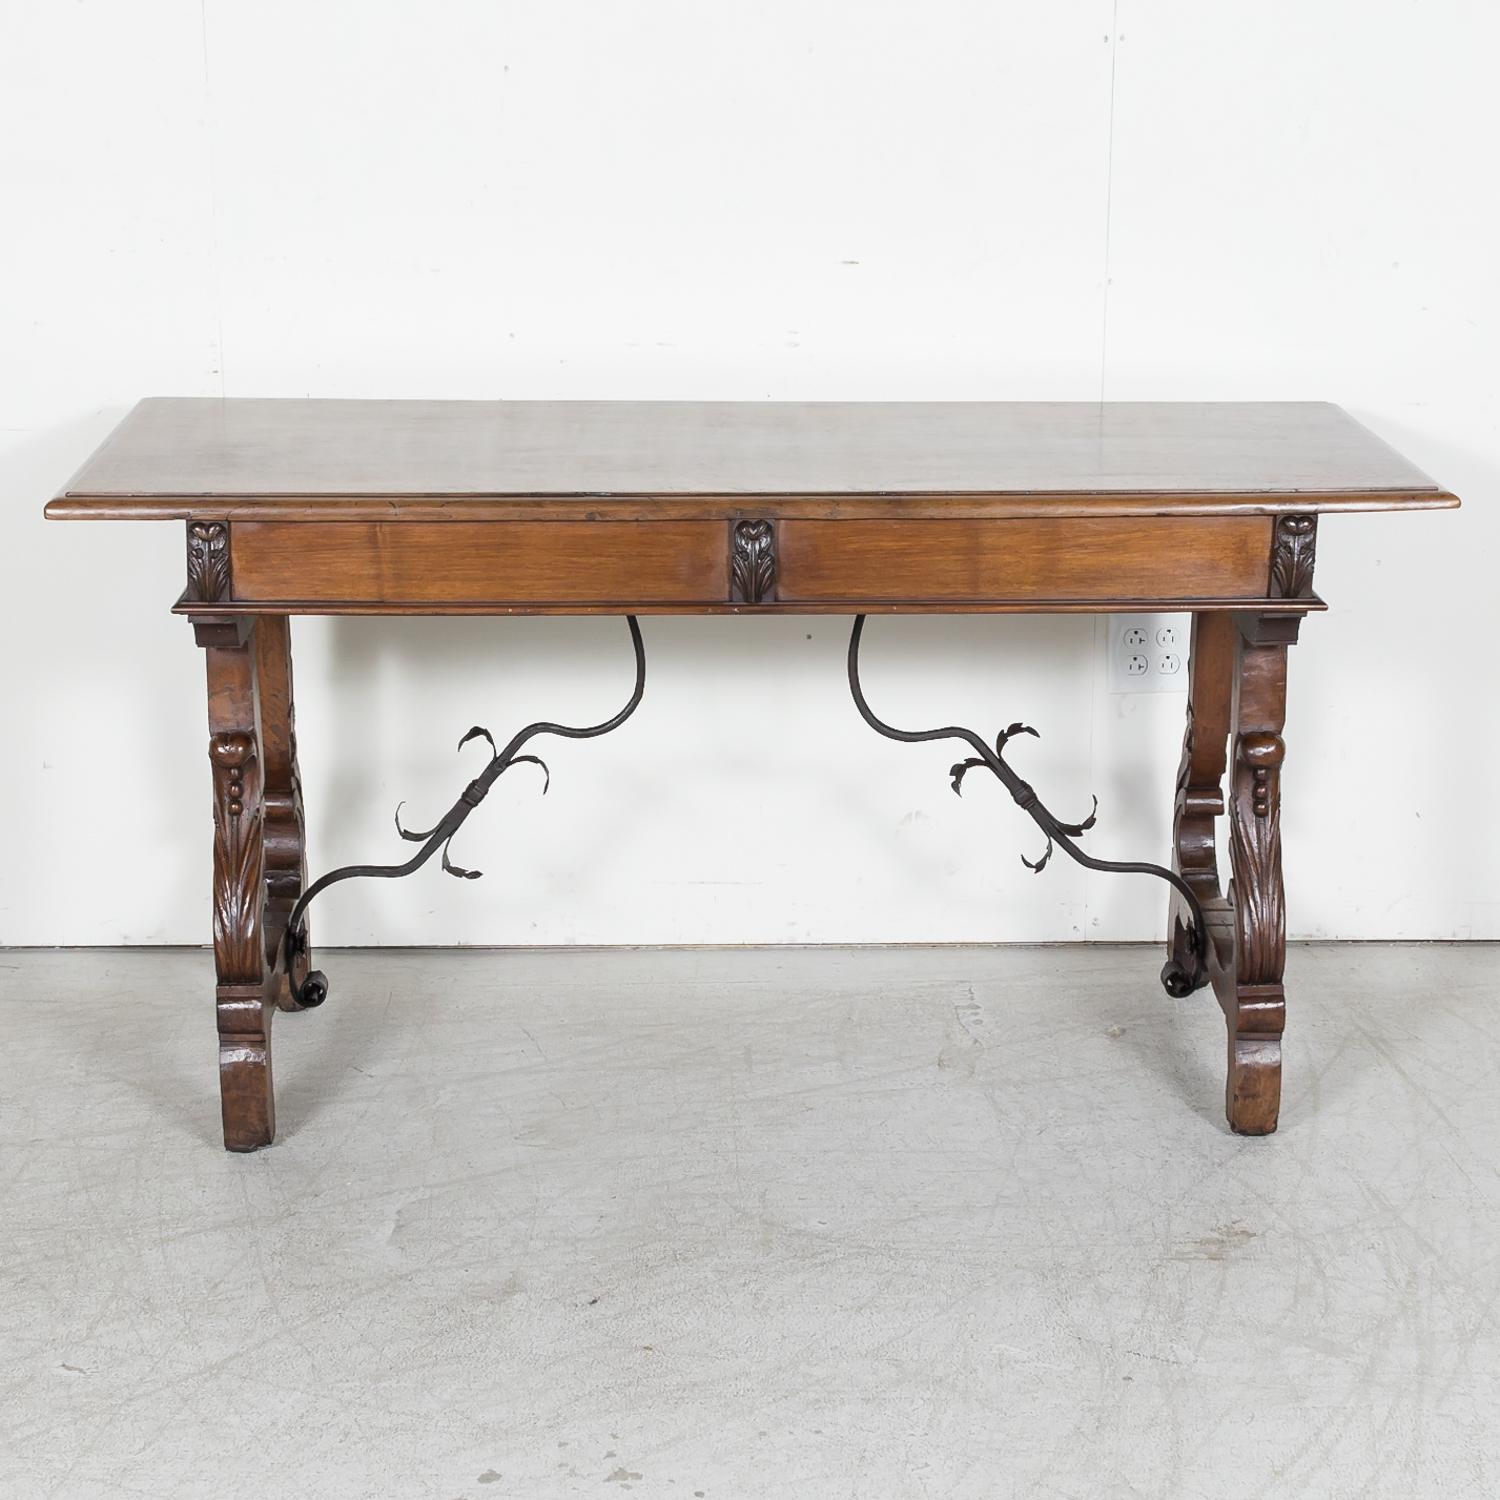 19th Century Italian Baroque Style Walnut Fratino Console Table with Drawers 15